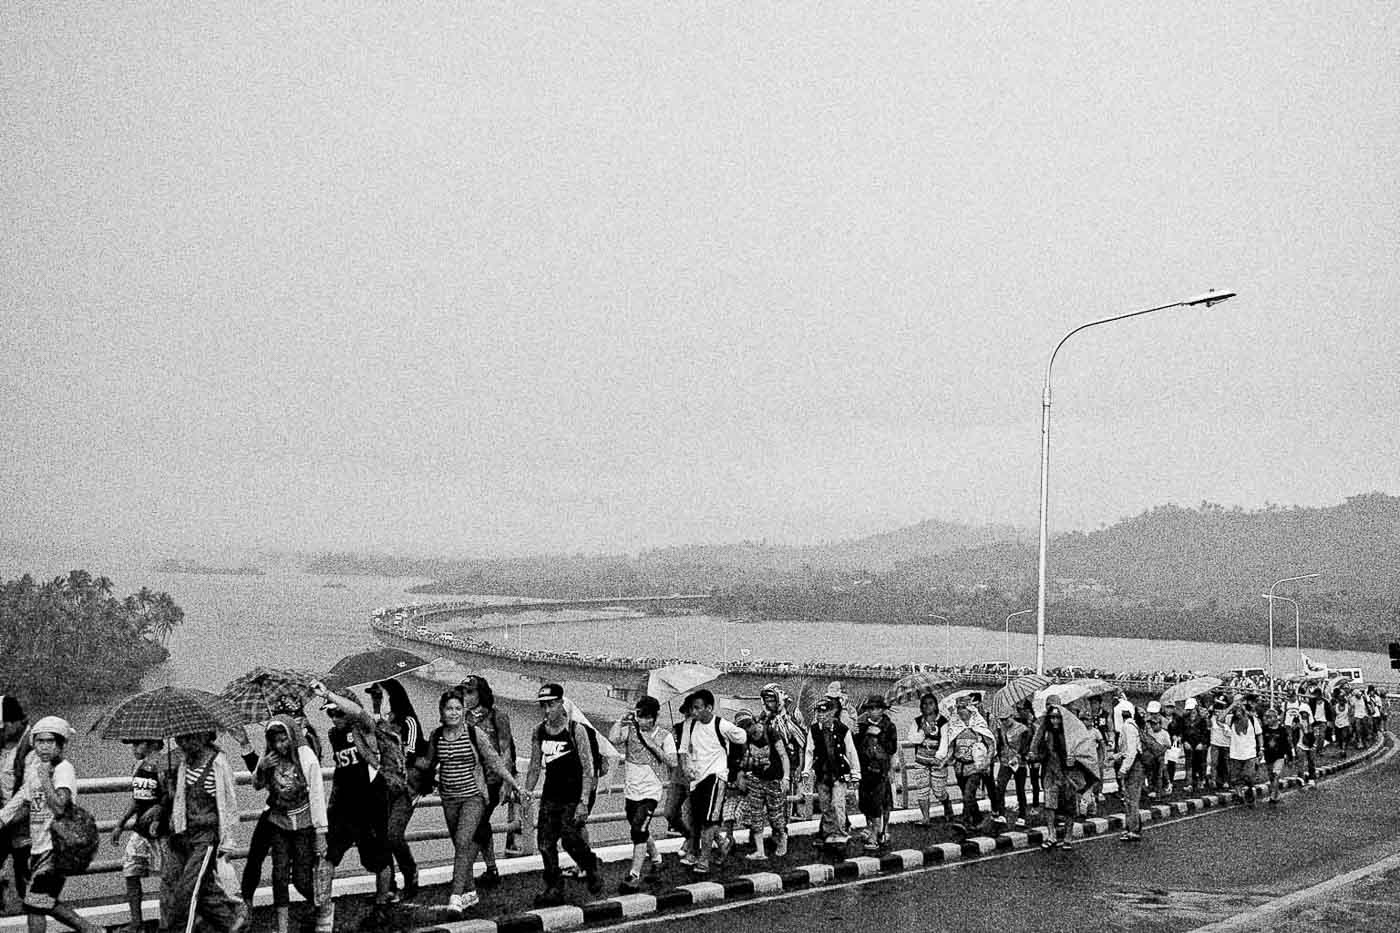 THE MARCH. A year after Haiyan, farmers and civil society groups march through San Juanico bridge to protest the allegedly slow response and rehabilitation efforts by government.  